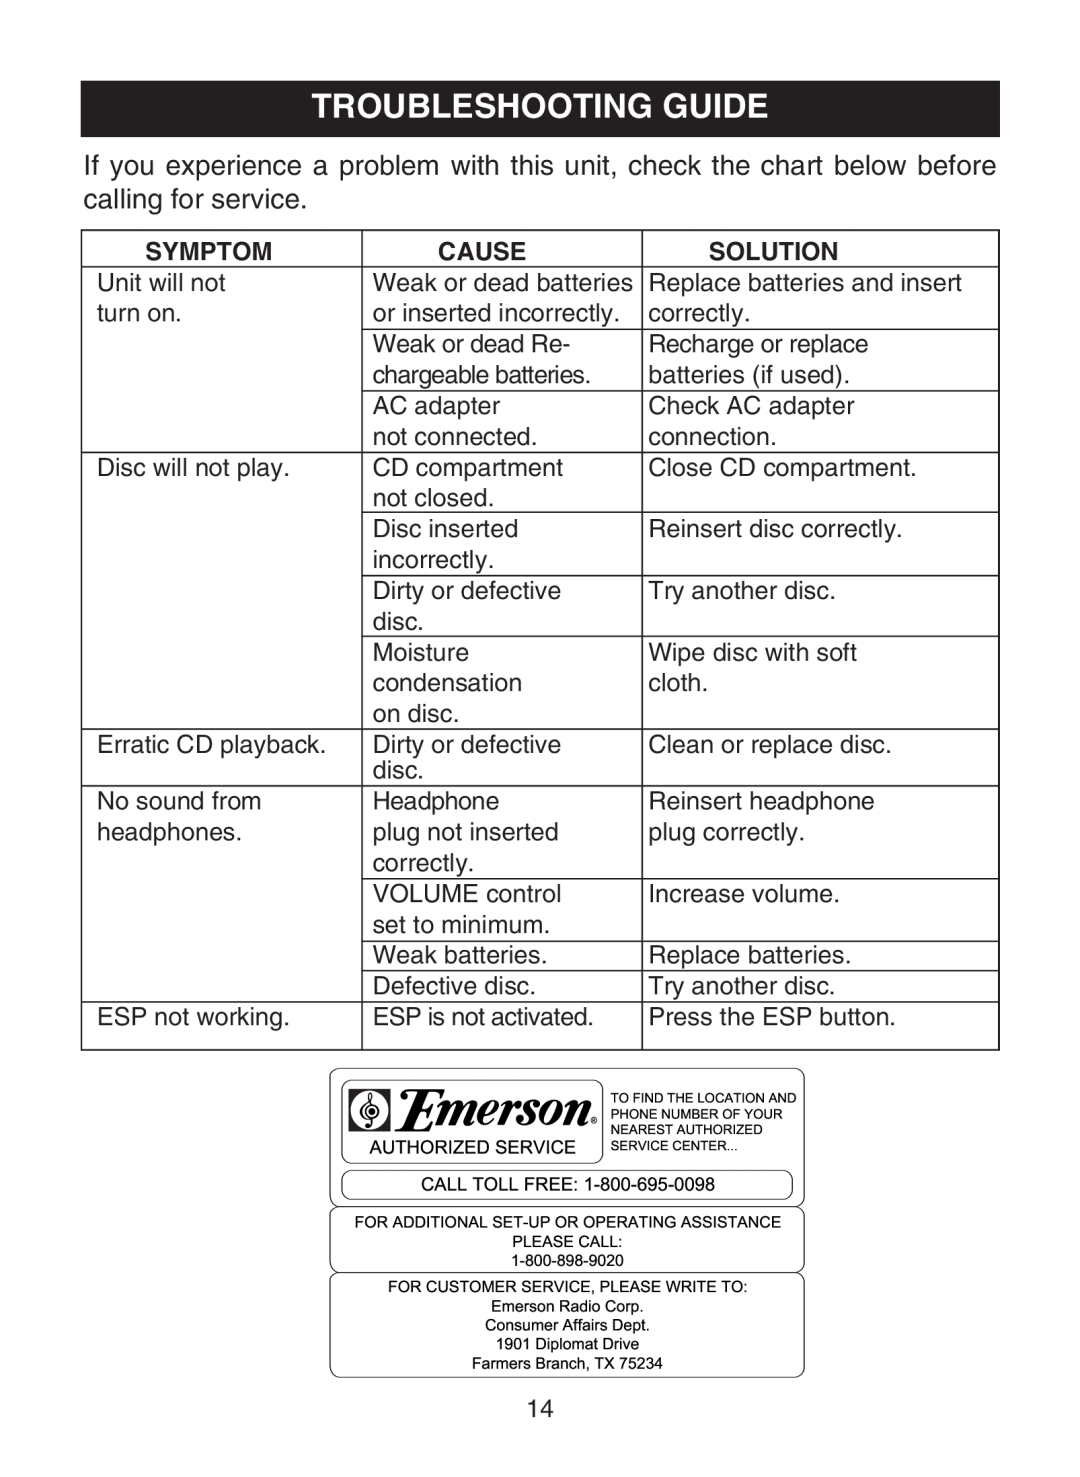 Emerson SB110A, SB111 owner manual Troubleshooting Guide, Symptom, Cause, Solution 